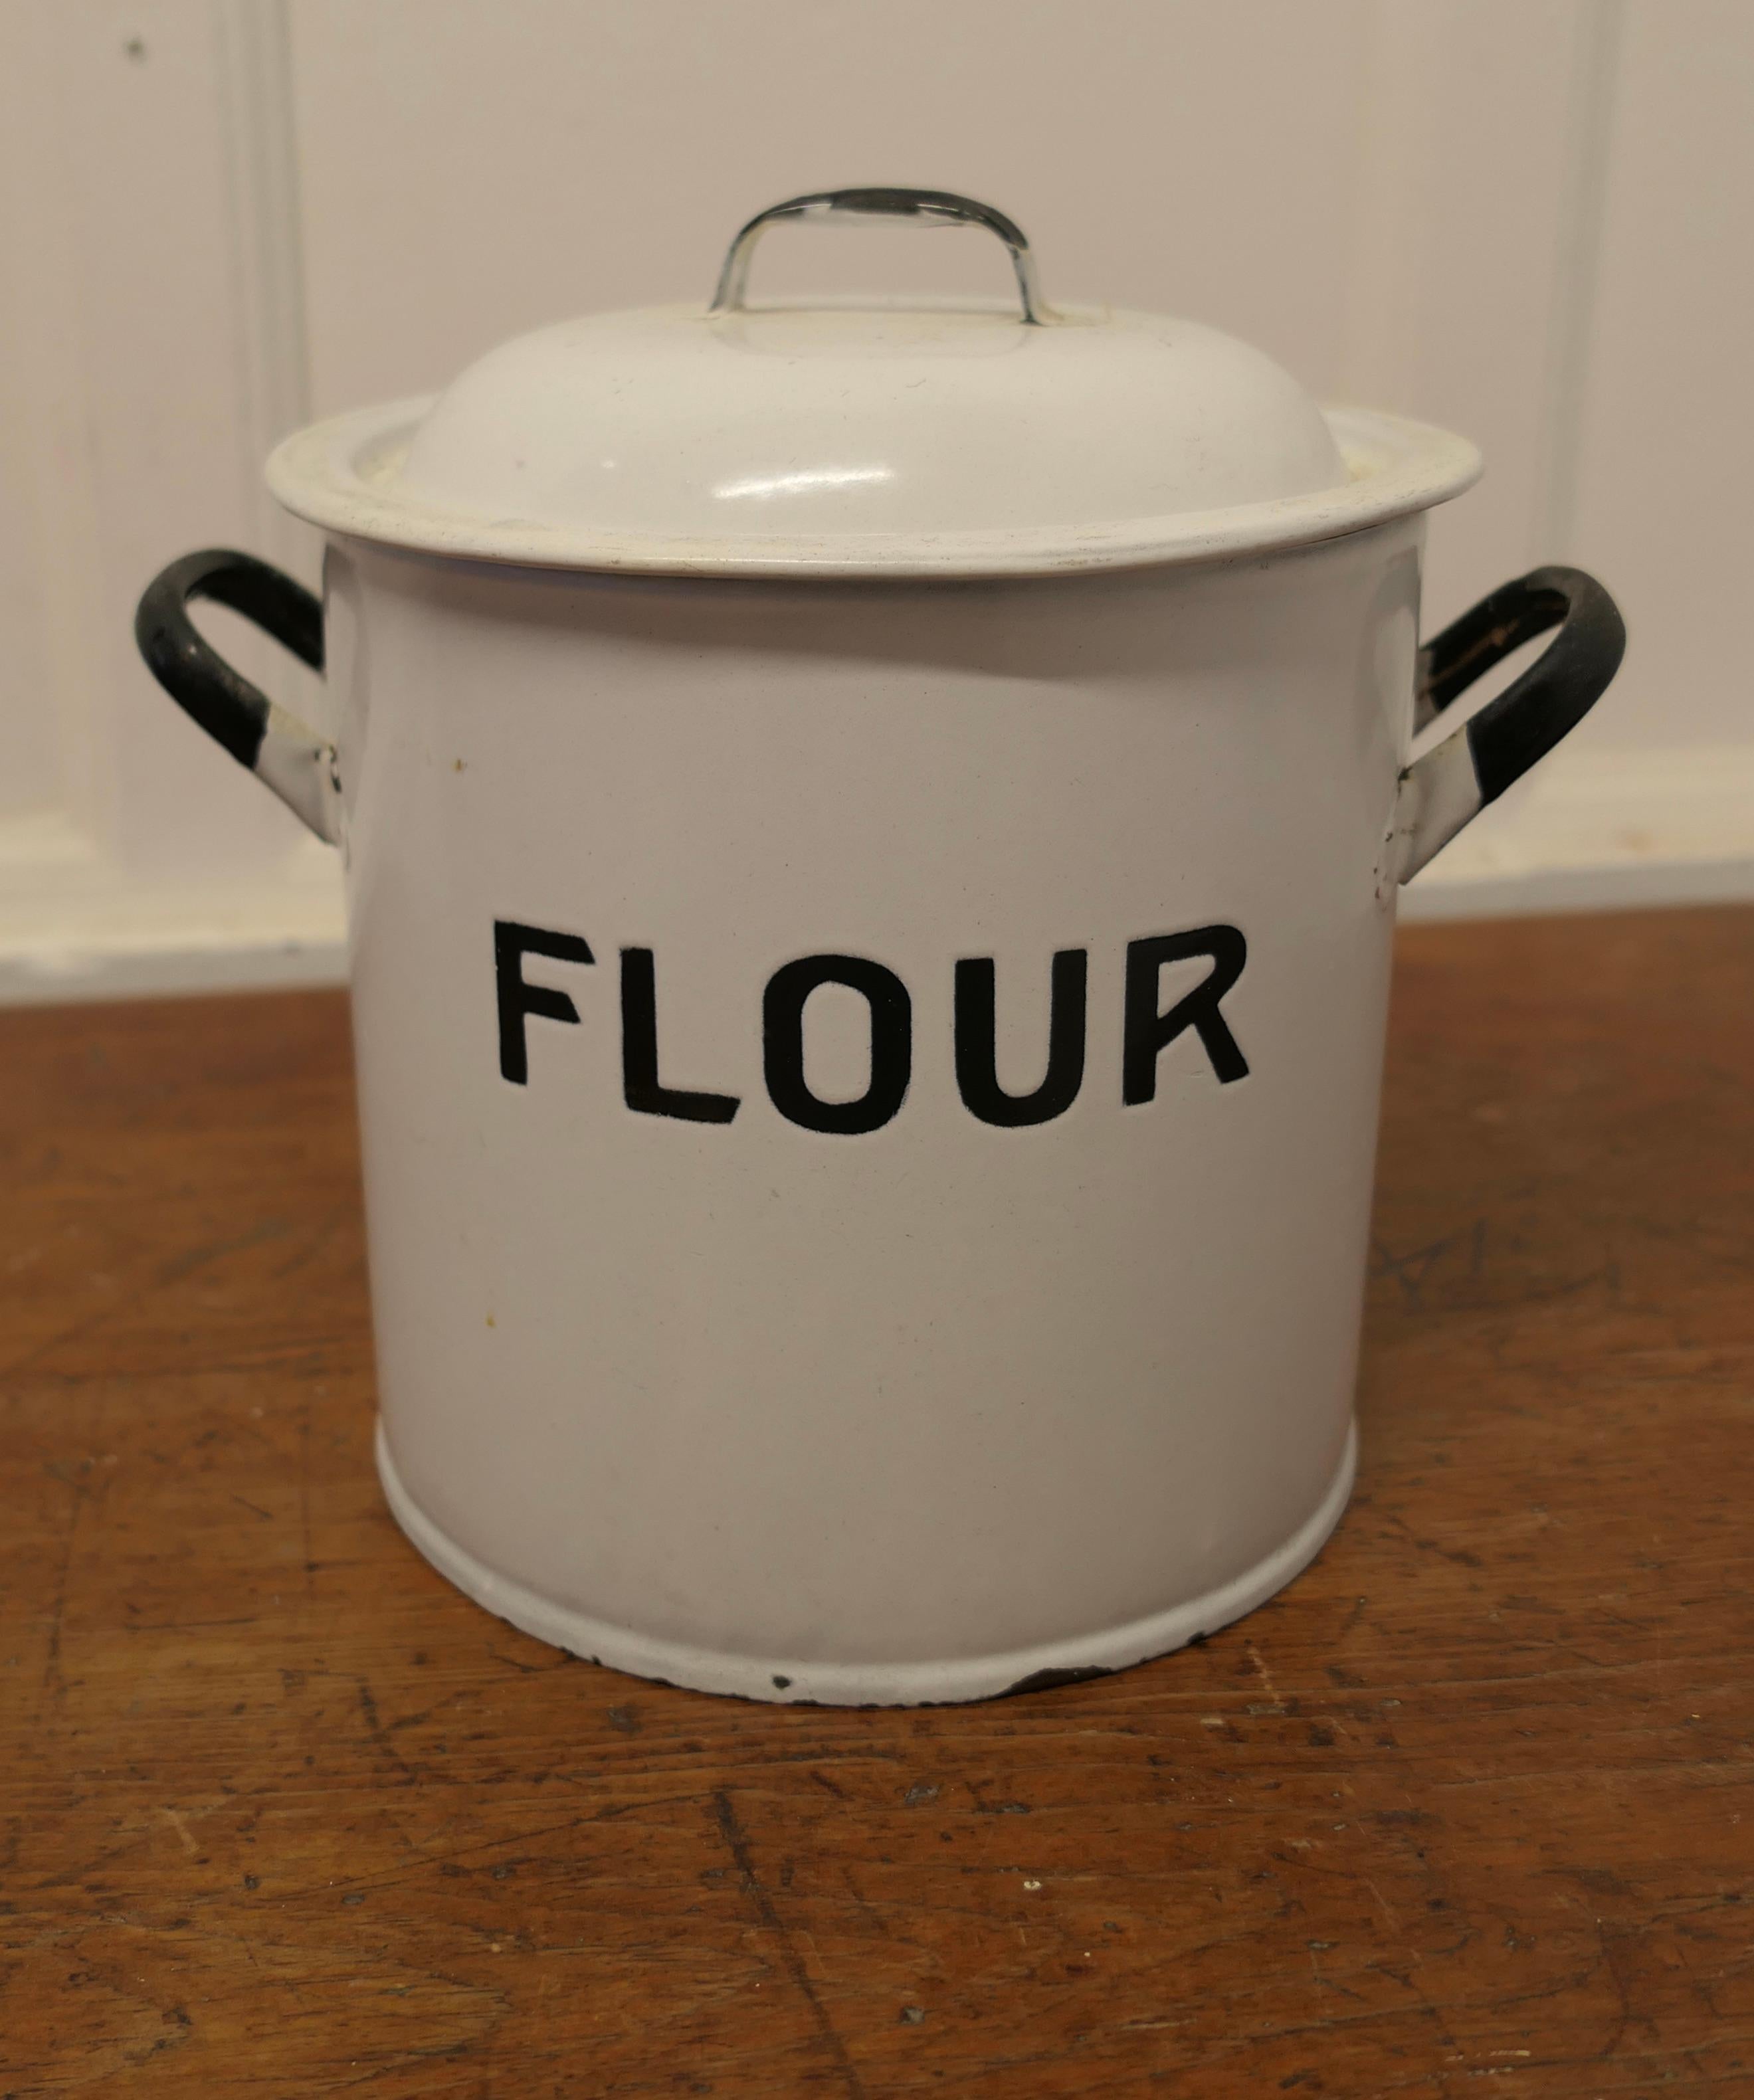 Lovely Enamel Flour Food Canister 

Original Enamel Flour Bin with handles and cover lid, the canister has Black lettering it is in very good condition with very minor dings
The Bin is 9” high has 11” in diameter including the handles
SW201